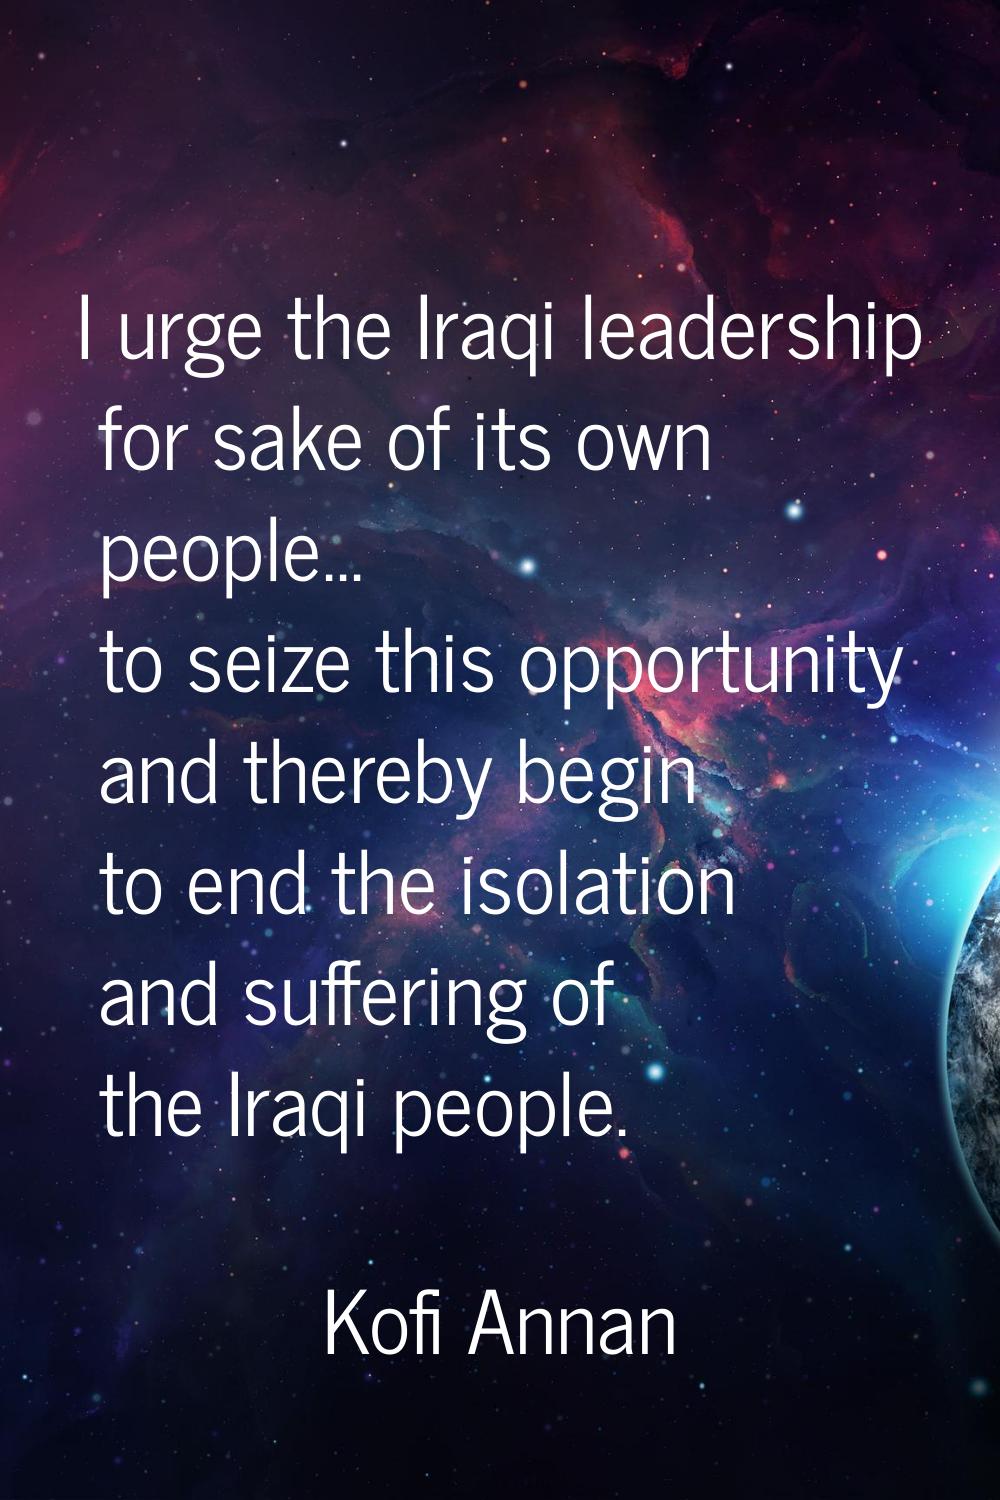 I urge the Iraqi leadership for sake of its own people... to seize this opportunity and thereby beg